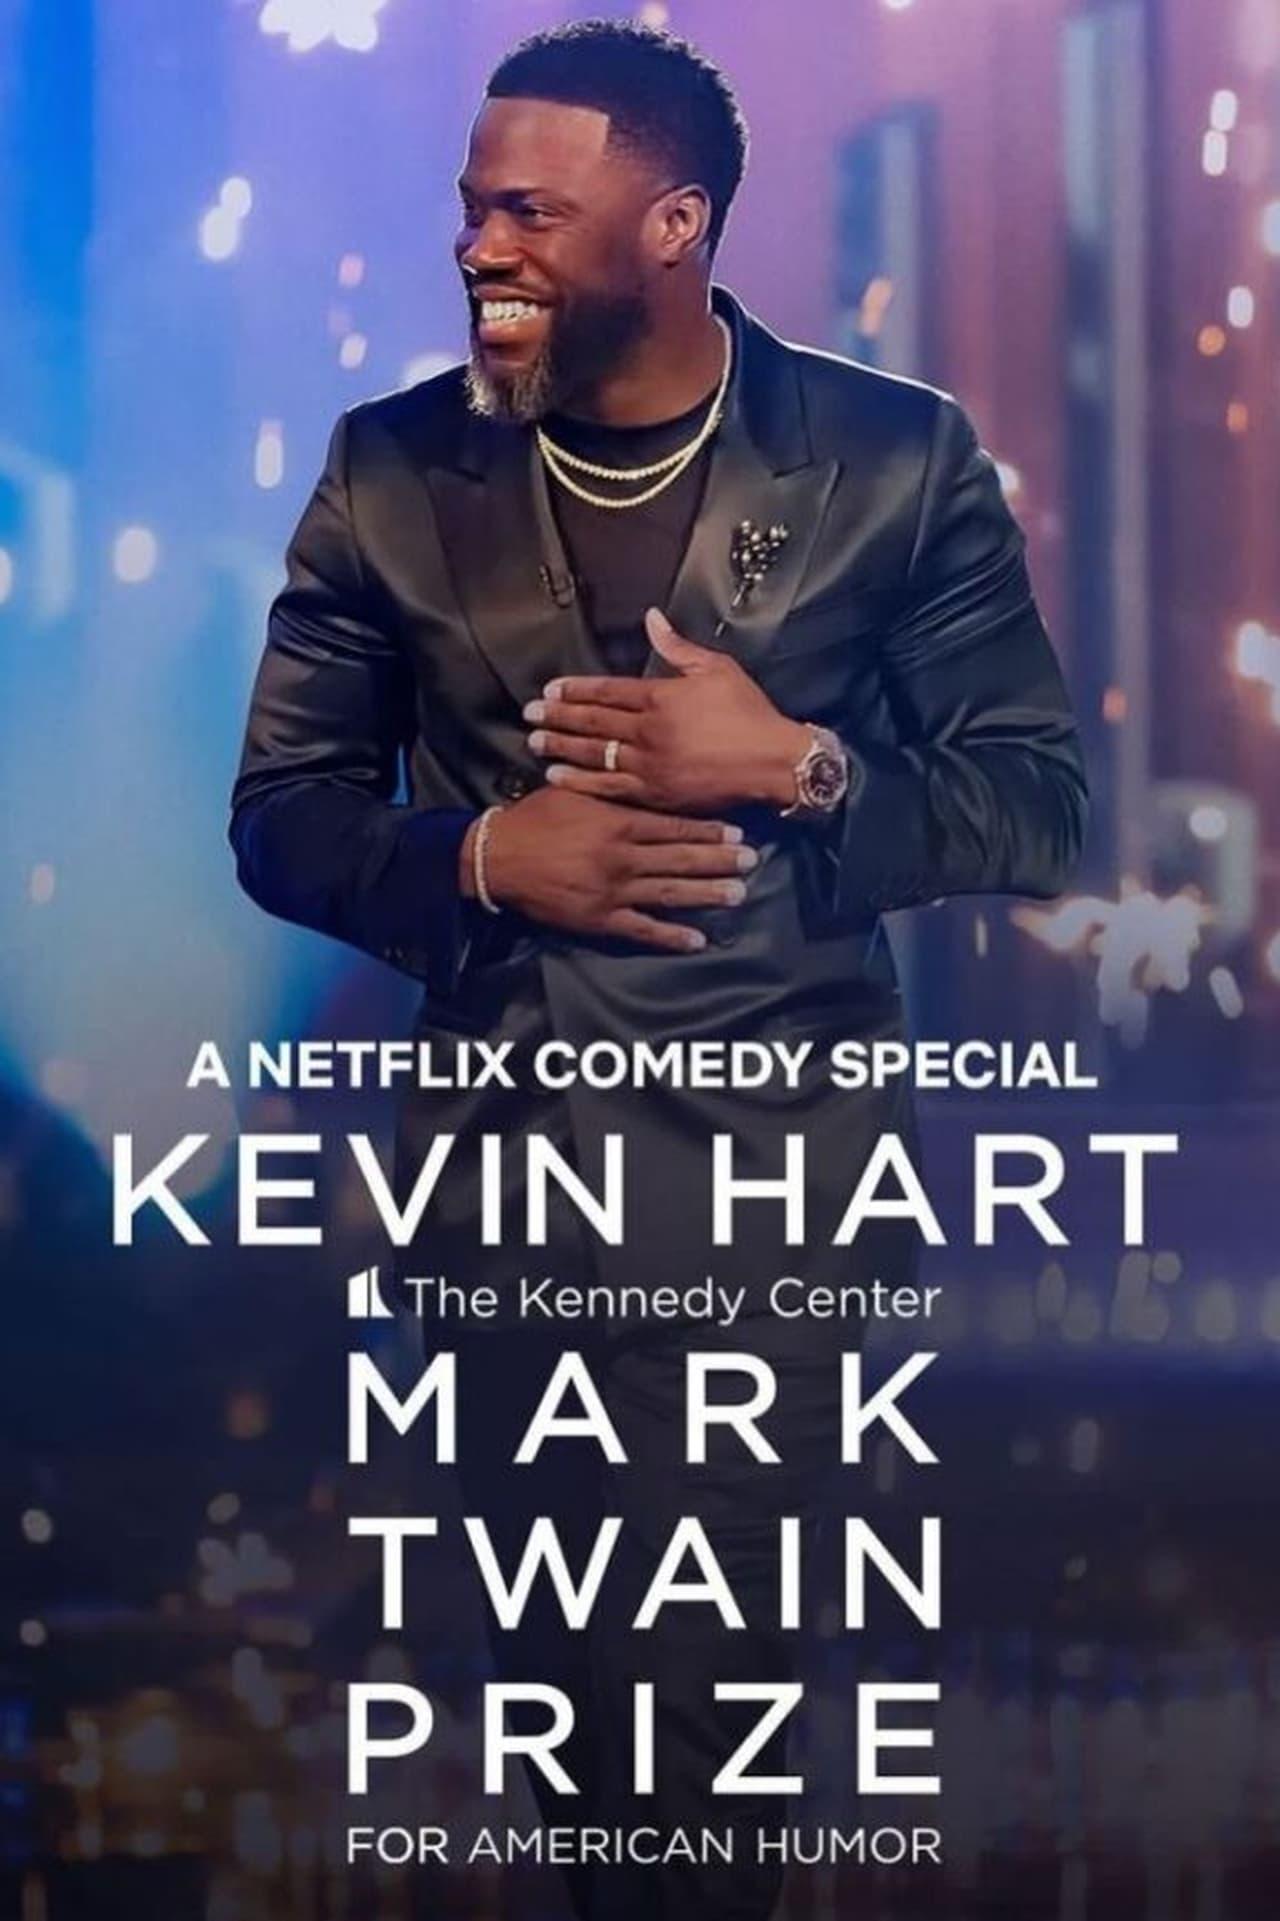 Kevin Hart: The Kennedy Center Mark Twain Prize for American Humor | awwrated | 你的 Netflix 避雷好幫手!